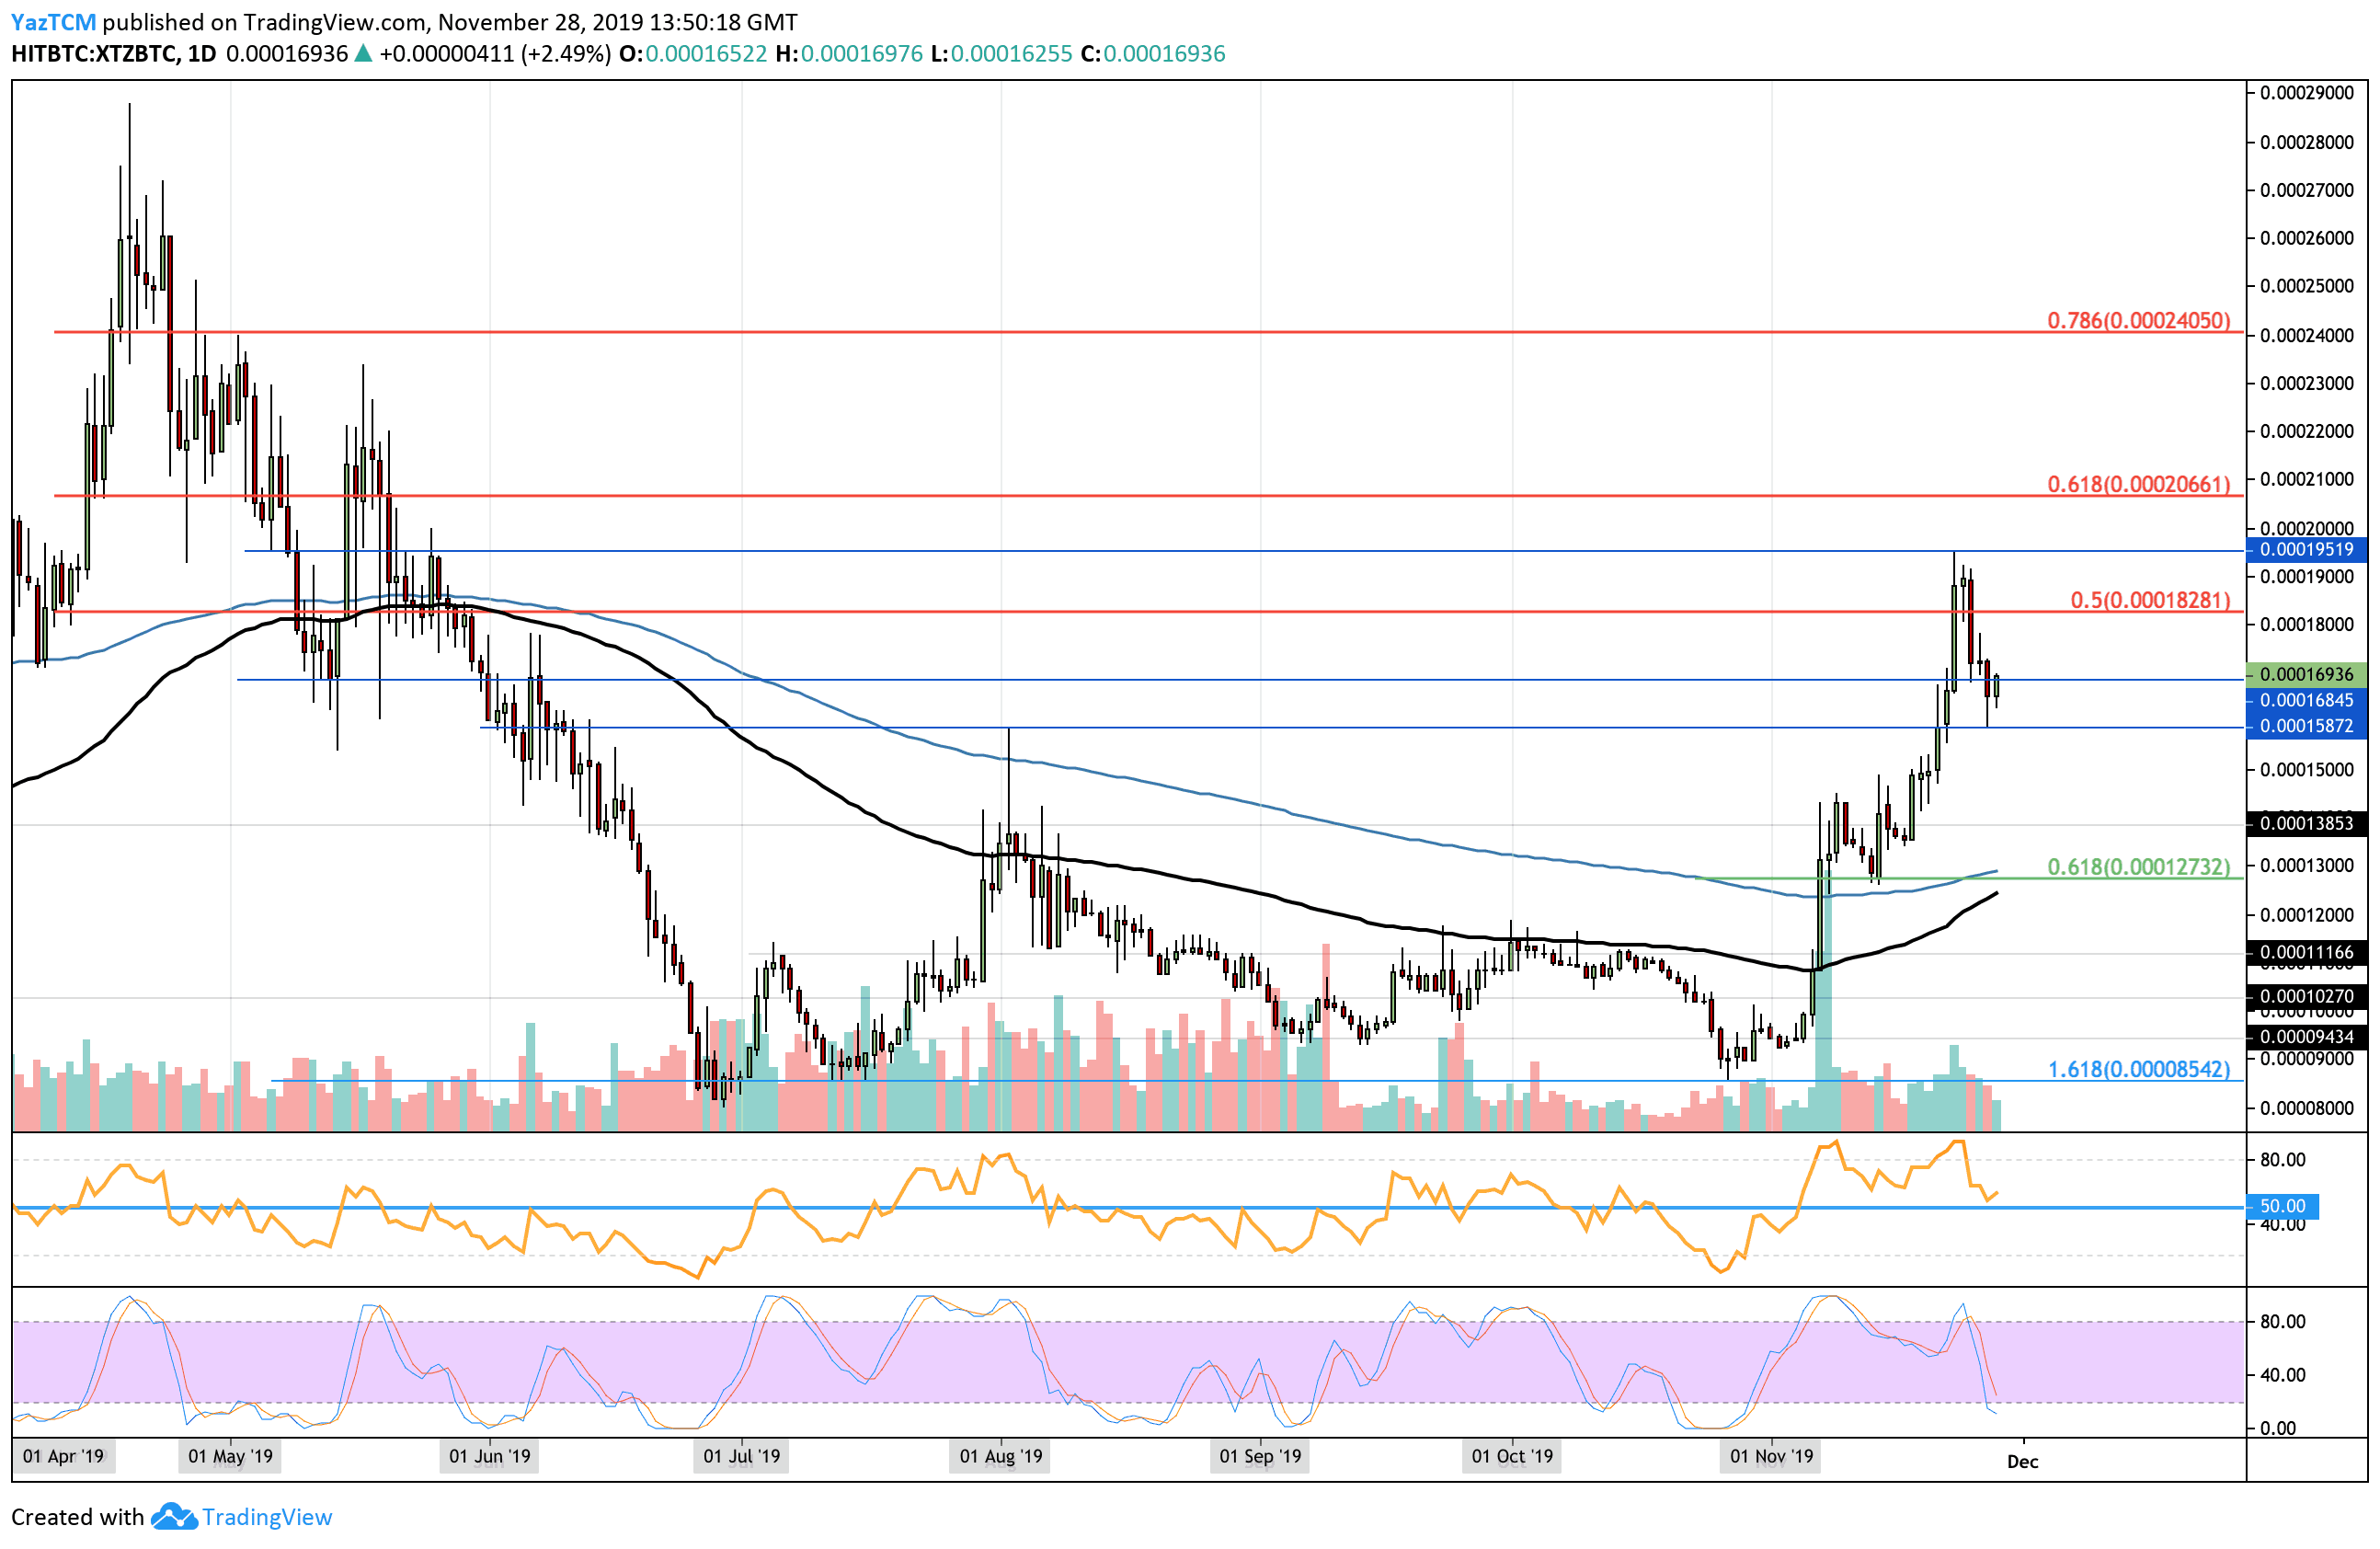 Tezos Price Analysis: XTZ Up 52% In November, How Much Higher Can It Get?